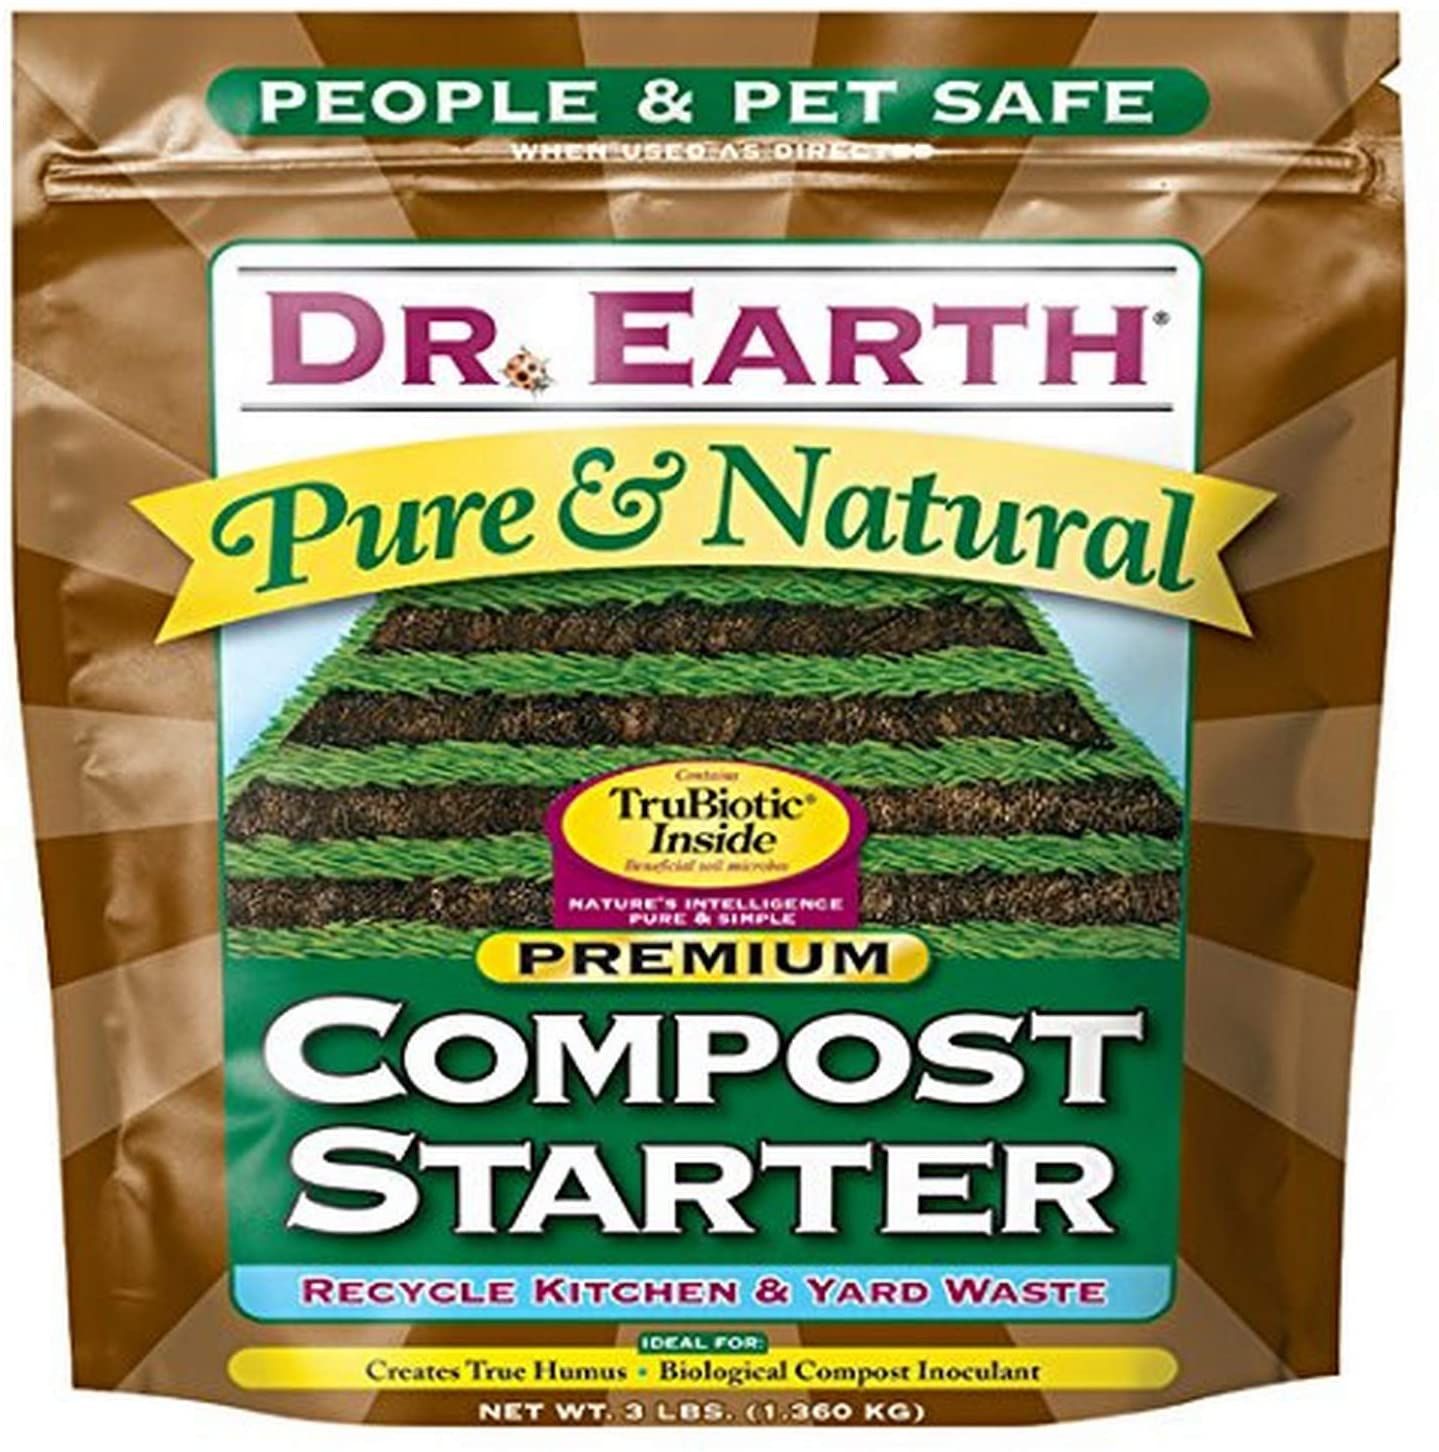 Dr. Earth 727 Compost Starter - $$title$$